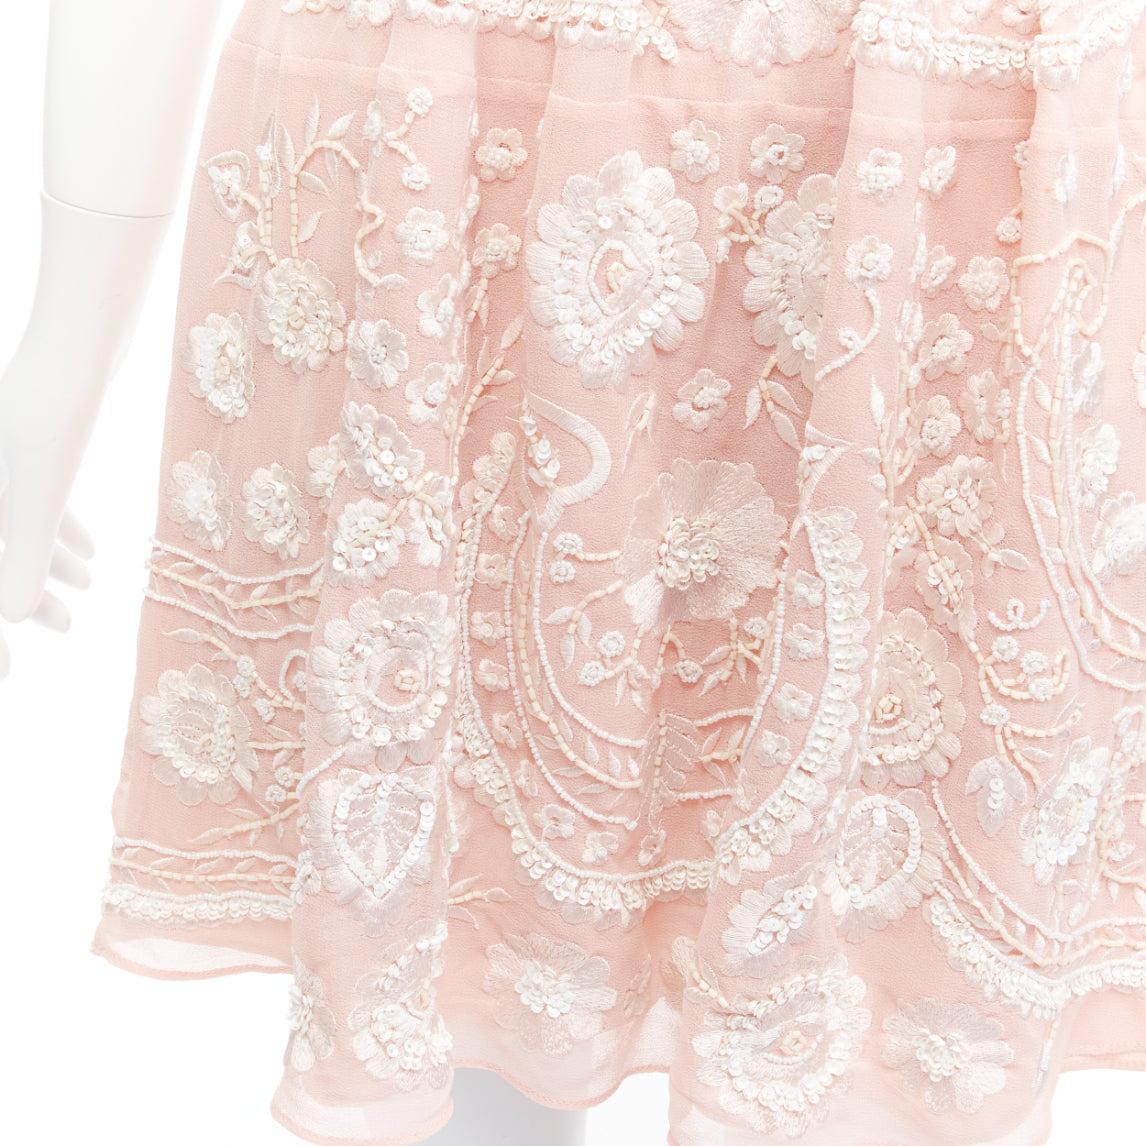 NEEDLE & THREAD pink cream intricate beaded embroidery embellished chiffon mini dress UK4 XXS
Reference: SNKO/A00407
Brand: Needle & Thread
Material: Polyester
Color: Pink, Cream
Pattern: Embellishments
Closure: Zip
Lining: Pink Polyester
Extra